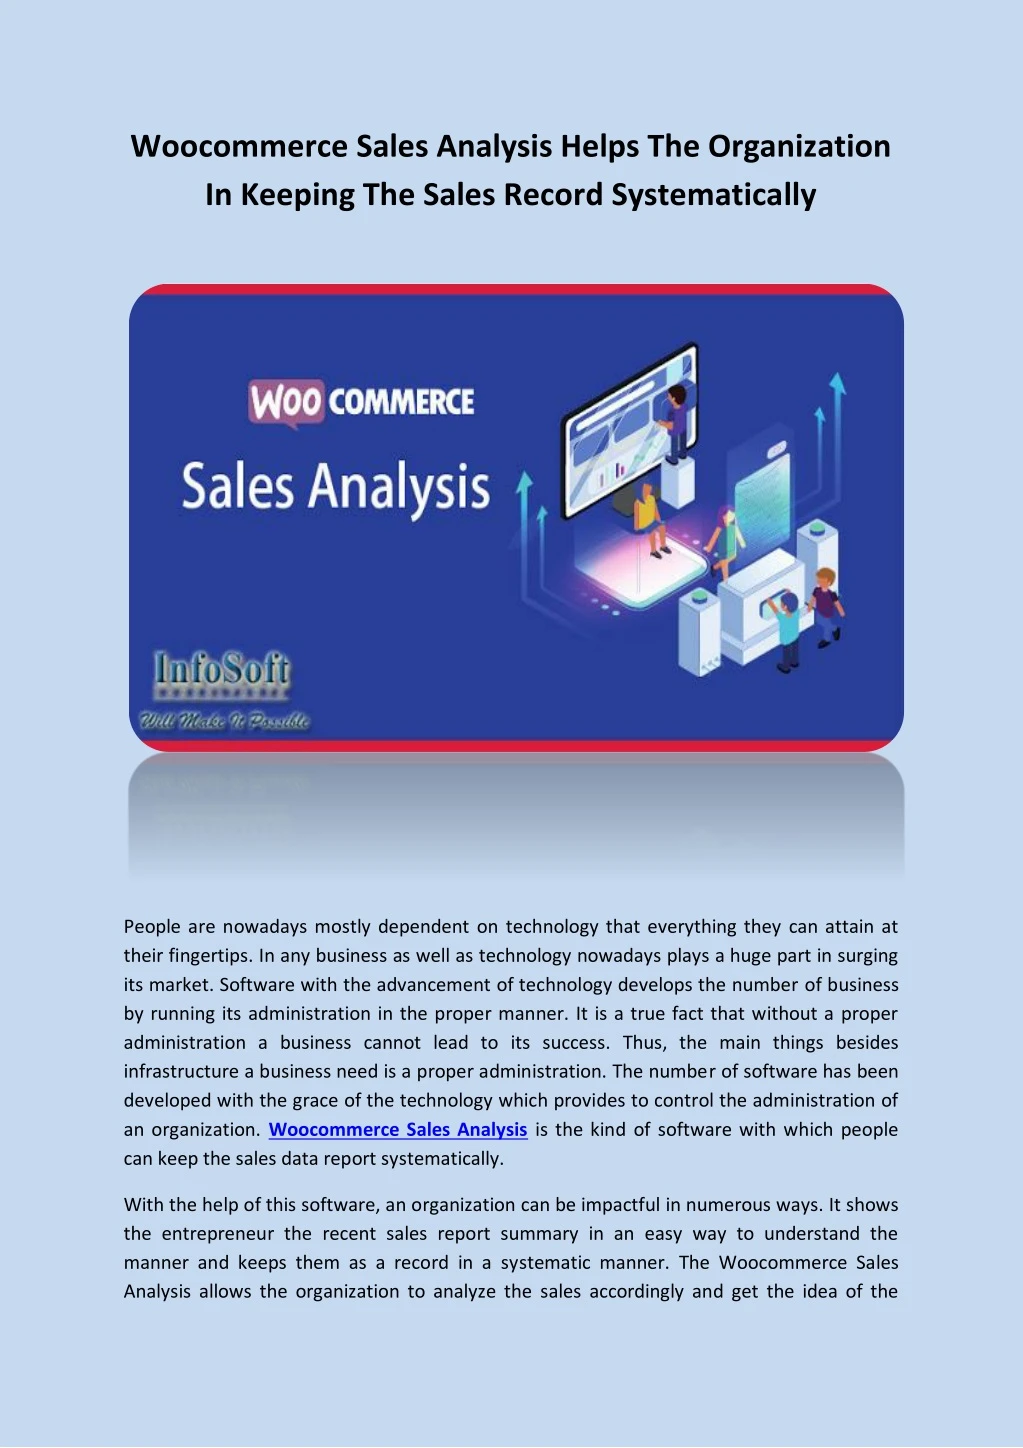 woocommerce sales analysis helps the organization